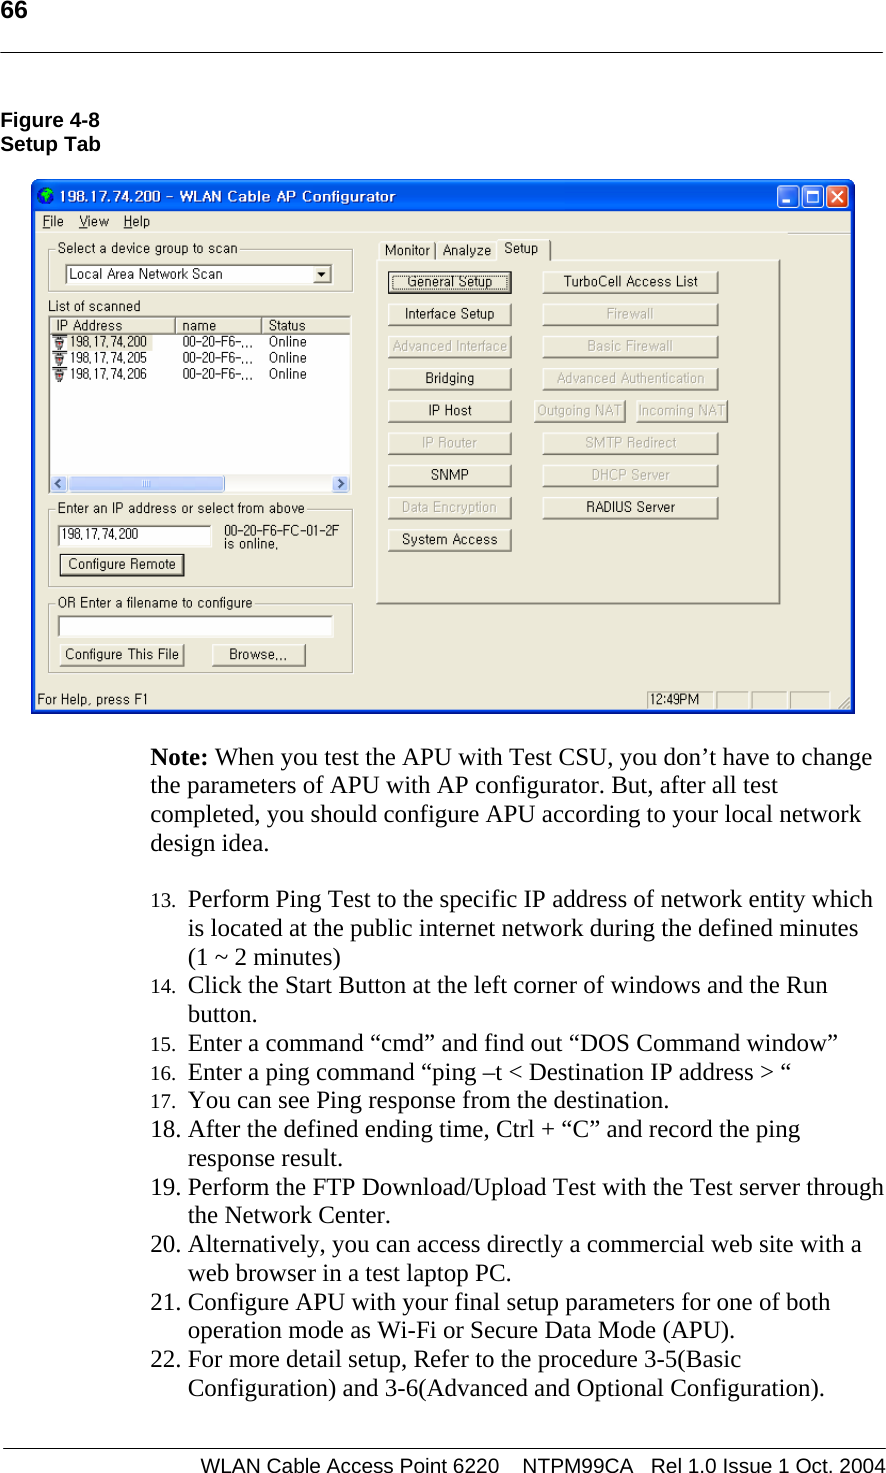   66   Figure 4-8 Setup Tab     Note: When you test the APU with Test CSU, you don’t have to change the parameters of APU with AP configurator. But, after all test completed, you should configure APU according to your local network design idea.    13. Perform Ping Test to the specific IP address of network entity which is located at the public internet network during the defined minutes  (1 ~ 2 minutes)  14. Click the Start Button at the left corner of windows and the Run button.  15. Enter a command “cmd” and find out “DOS Command window” 16. Enter a ping command “ping –t &lt; Destination IP address &gt; “  17. You can see Ping response from the destination. 18. After the defined ending time, Ctrl + “C” and record the ping response result. 19. Perform the FTP Download/Upload Test with the Test server through the Network Center. 20. Alternatively, you can access directly a commercial web site with a web browser in a test laptop PC.  21. Configure APU with your final setup parameters for one of both operation mode as Wi-Fi or Secure Data Mode (APU). 22. For more detail setup, Refer to the procedure 3-5(Basic Configuration) and 3-6(Advanced and Optional Configuration).  WLAN Cable Access Point 6220    NTPM99CA   Rel 1.0 Issue 1 Oct. 2004